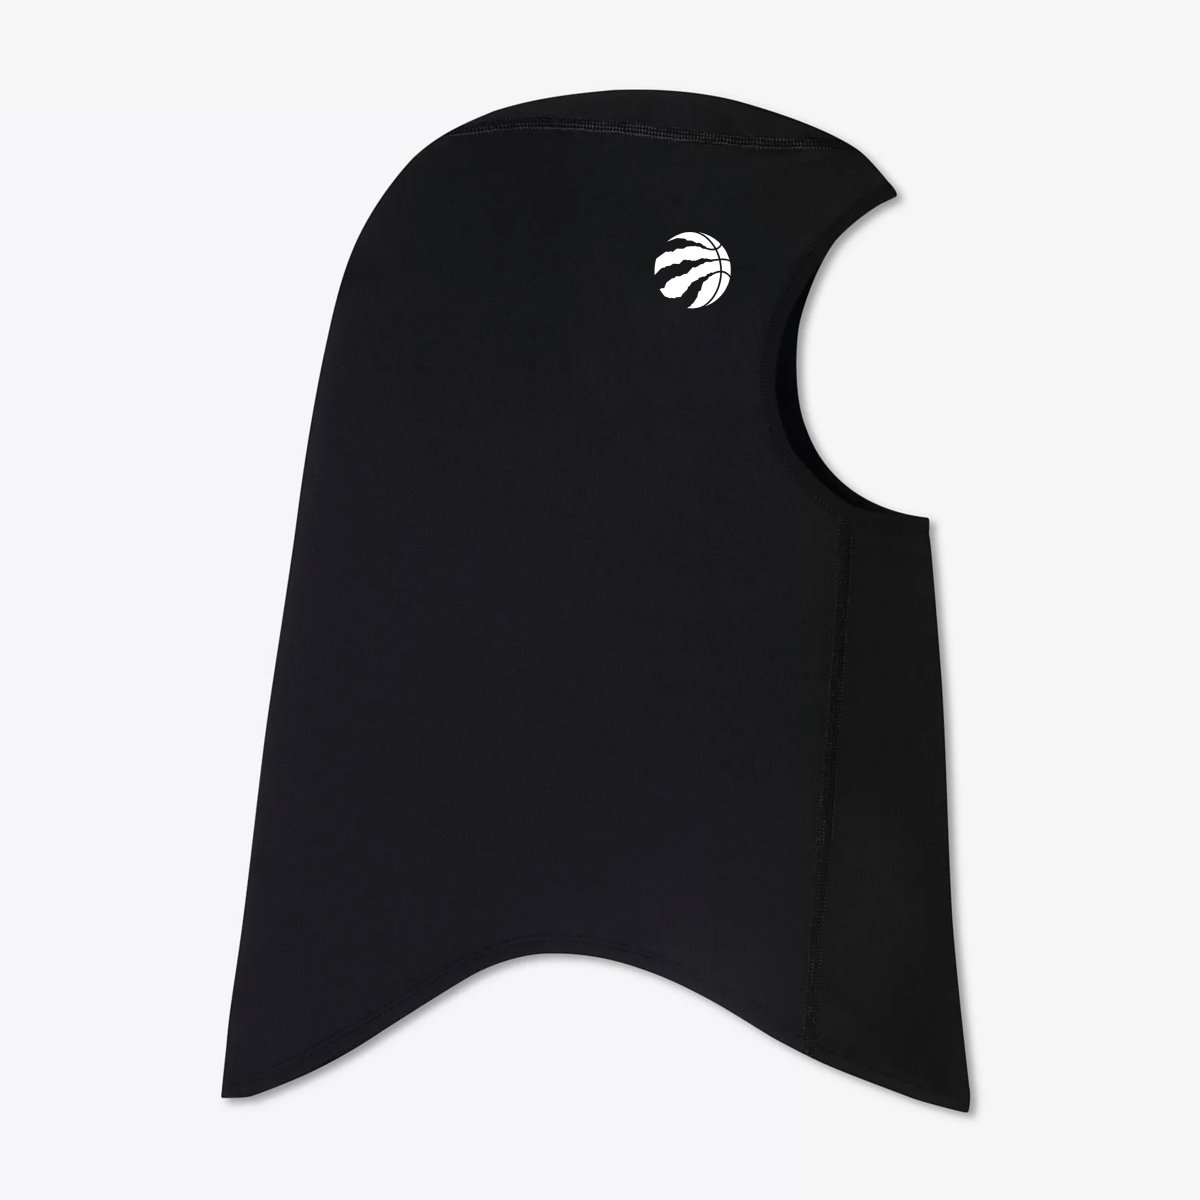 A Toronto Raptors branded Nike hijab is shown in this undated handout photo.